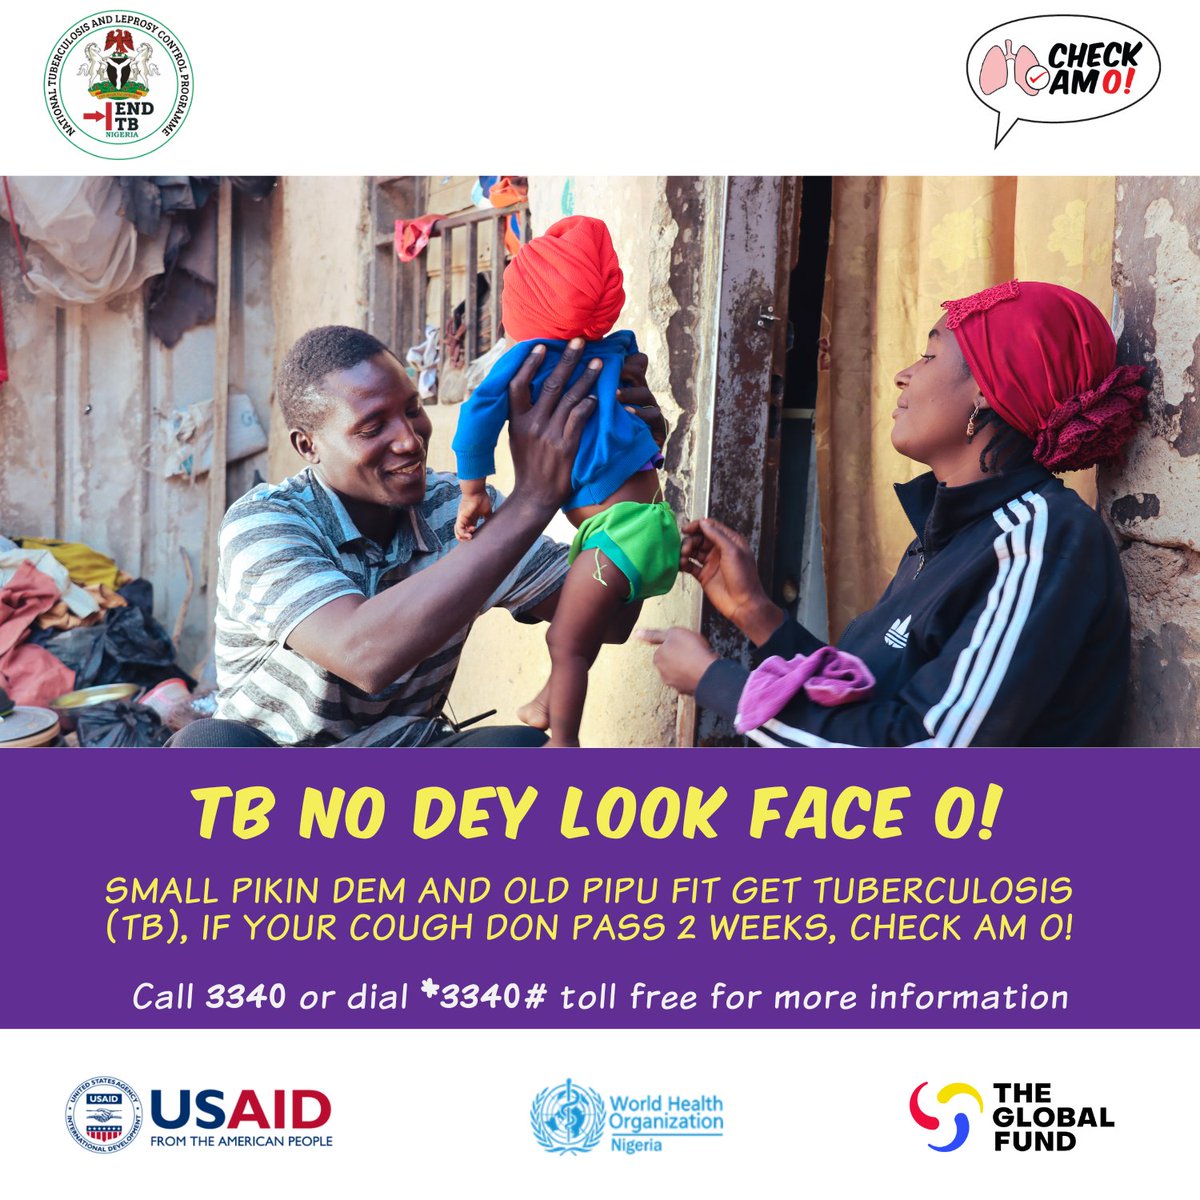 Small pikin dem, and old pipu, fit get TB.

If your cough don pass 2 weeks, check am o!

You fit call this number free; 3340 or dial *3340# make them tell you more about TB.

#YesWeCanEndTB #NoGreeForTB #CheckAmO! #EndTB